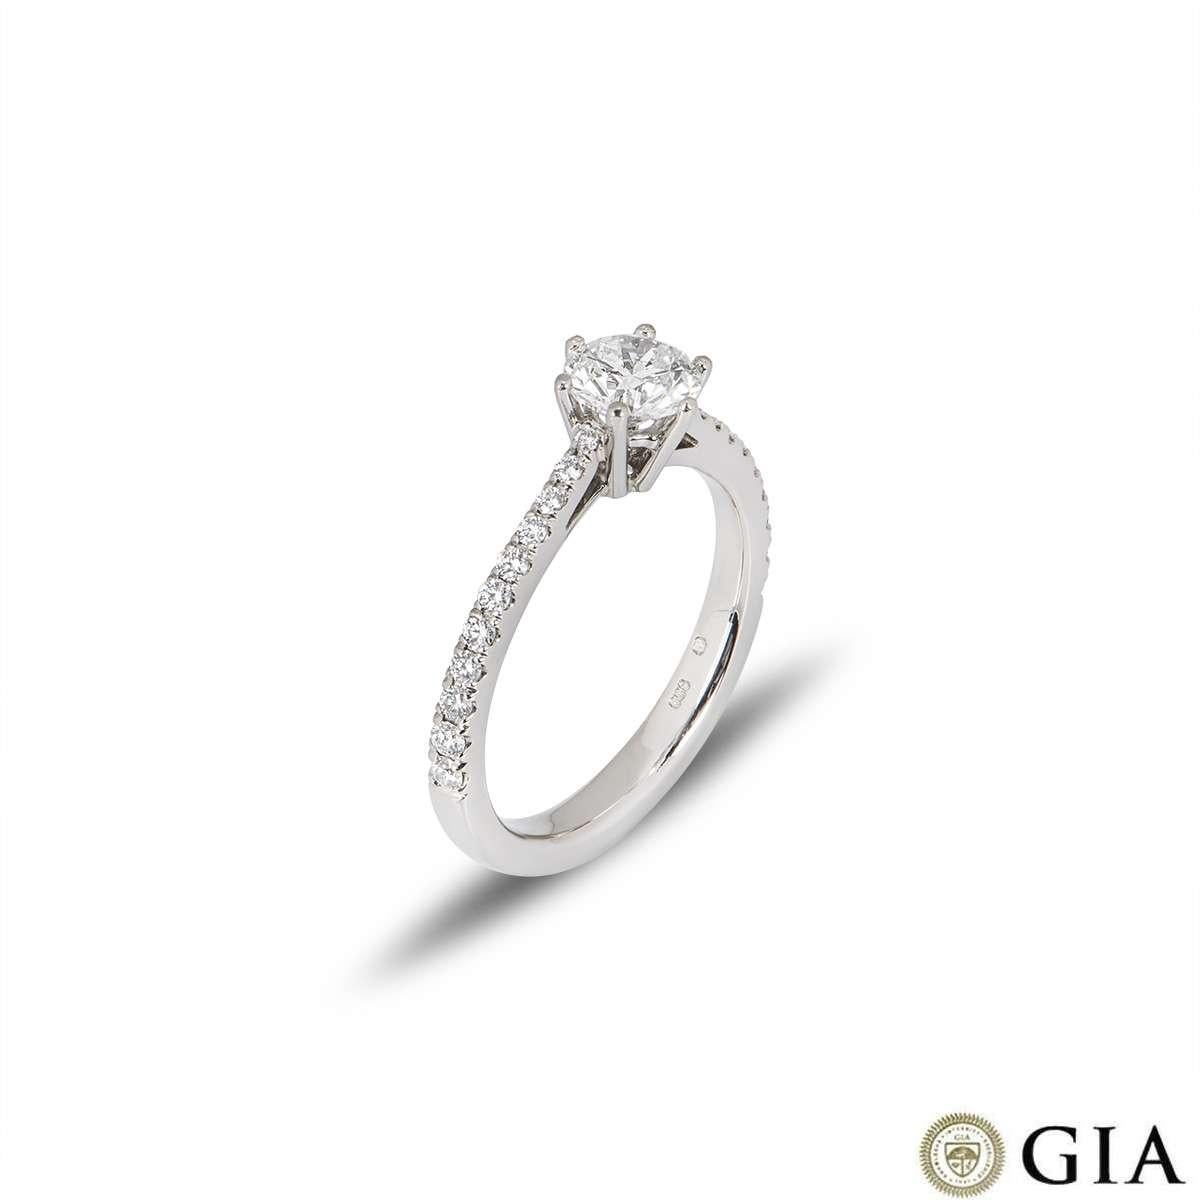 A beautiful diamond ring in platinum. The round brilliant cut diamond is set within 6 claws and weighs 0.64ct, is F colour and VS1 in clarity. The diamond scores an excellent rating in all three aspects for cut, polish and symmetry - this is known